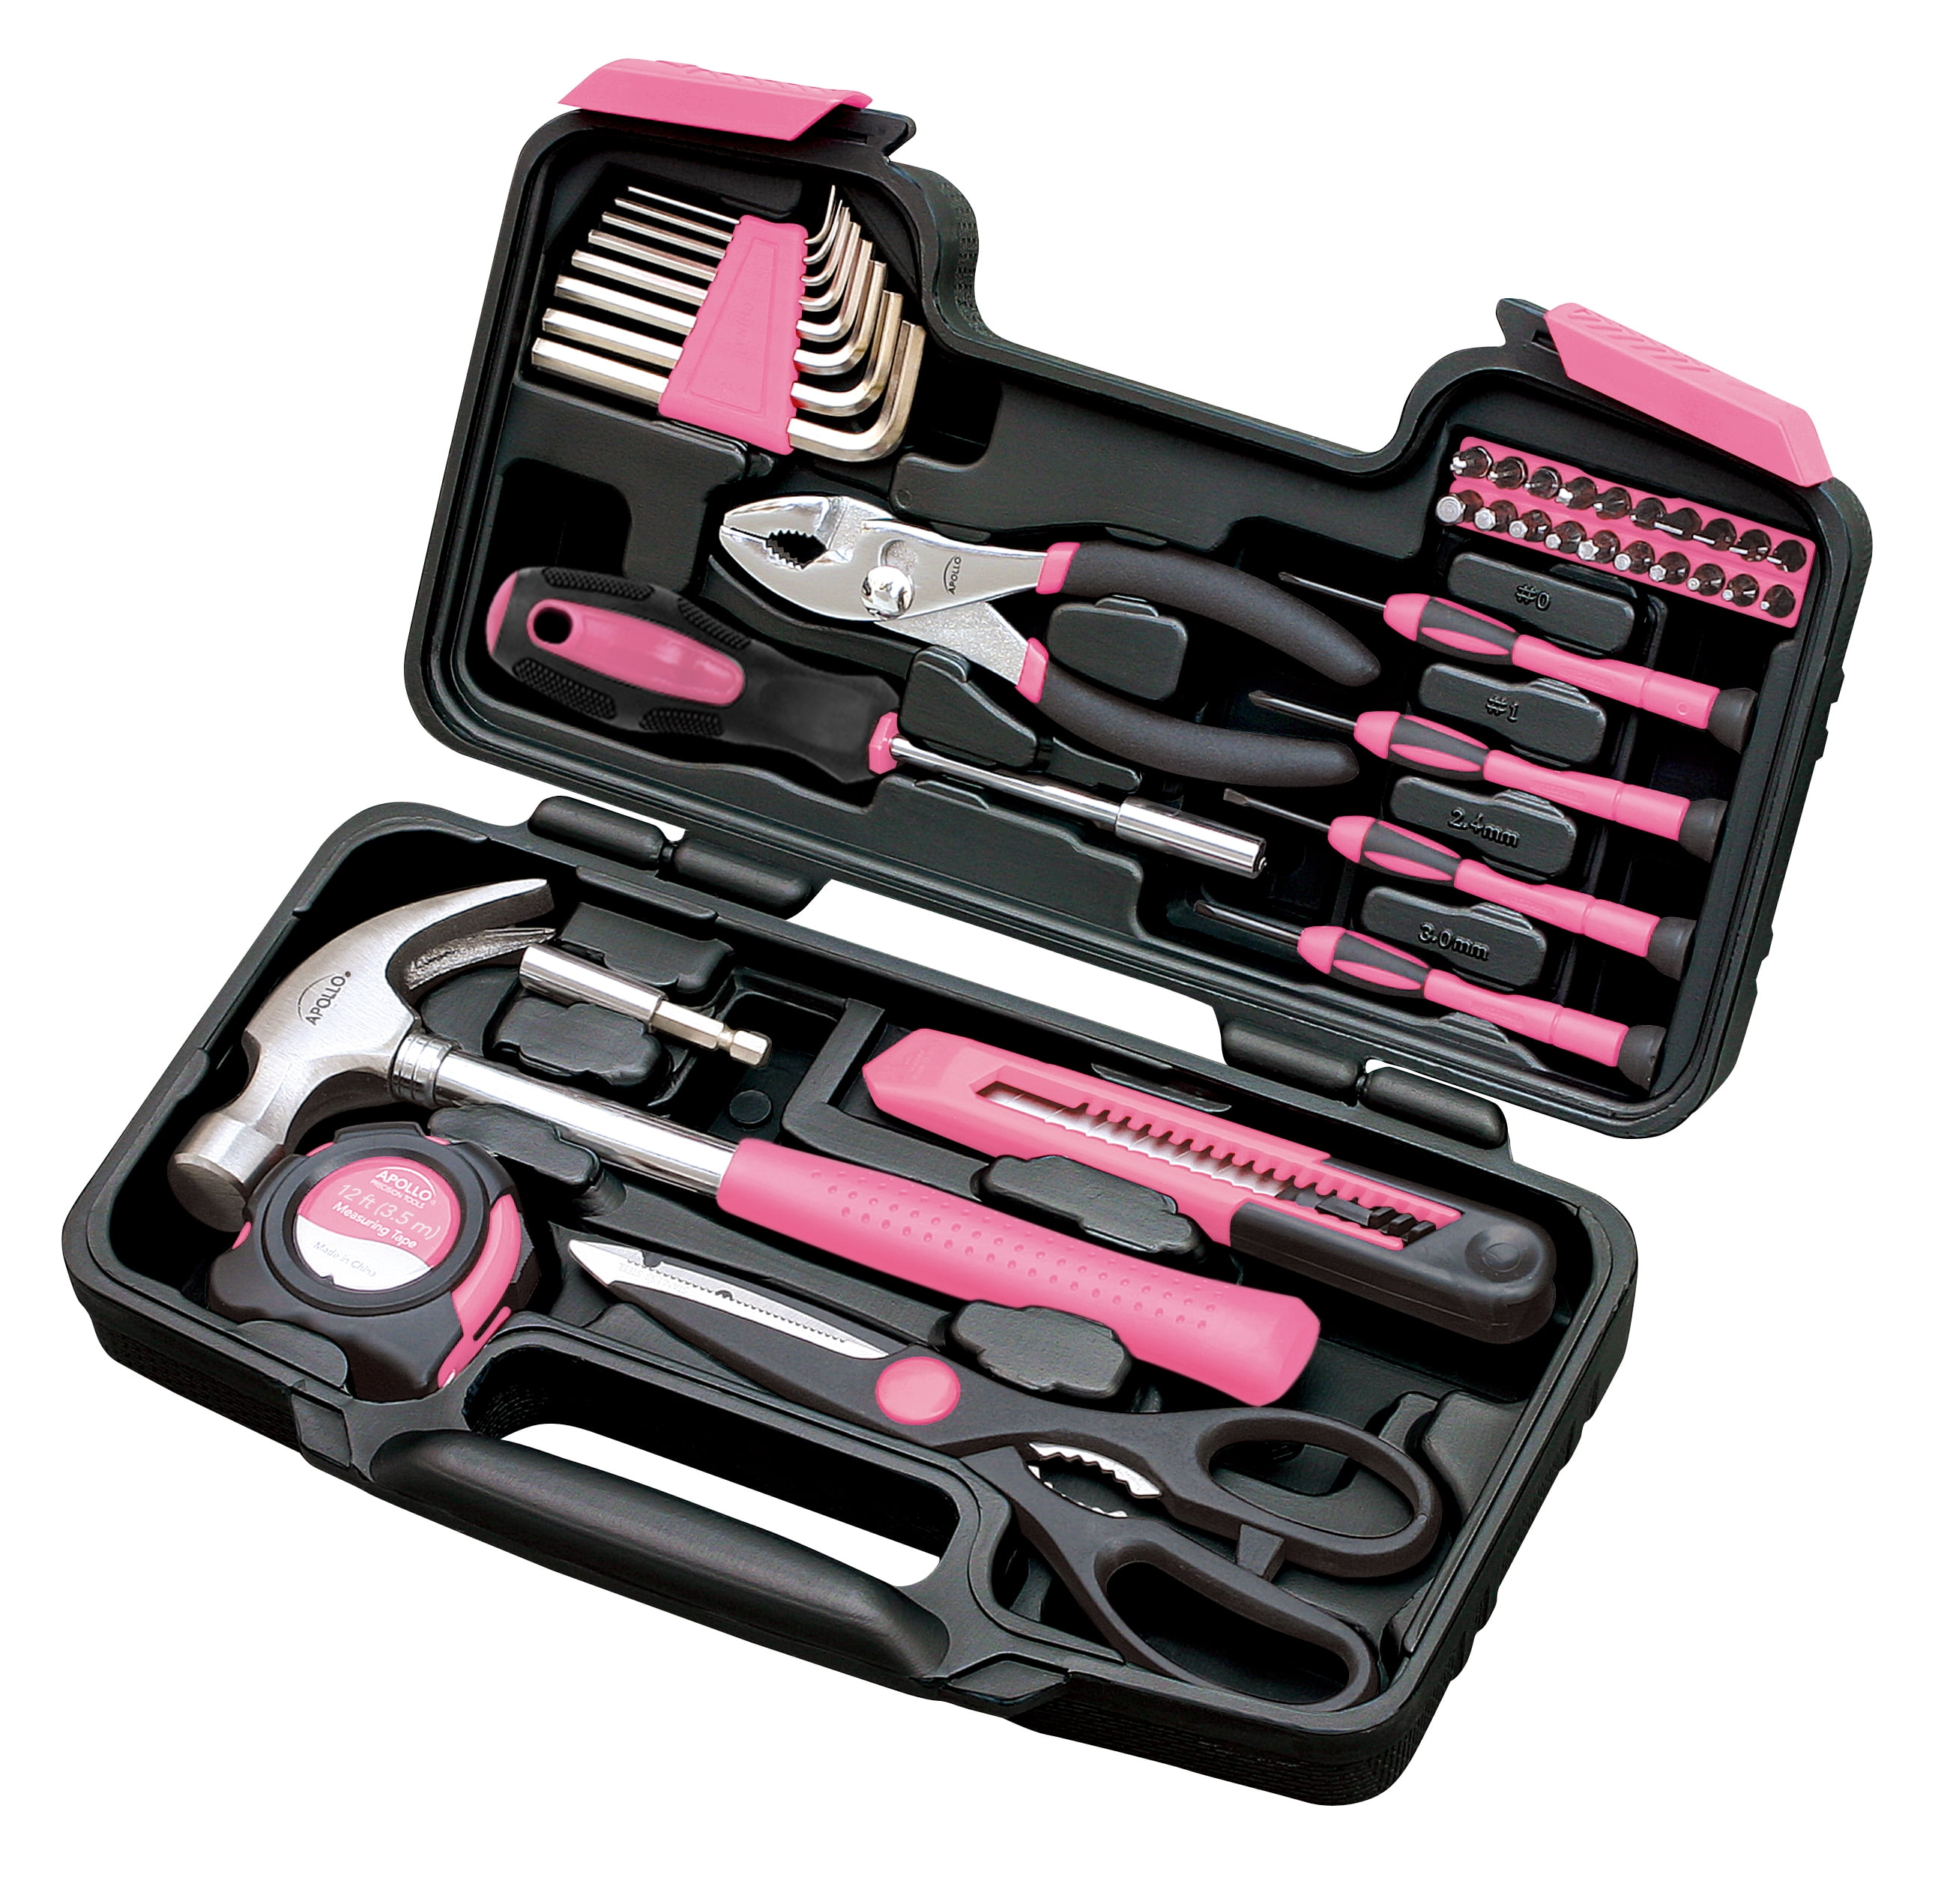 Pink Donation Made to Breast Cancer Research Apollo Precision Tools DT9706P General Tool Set 39-Piece 